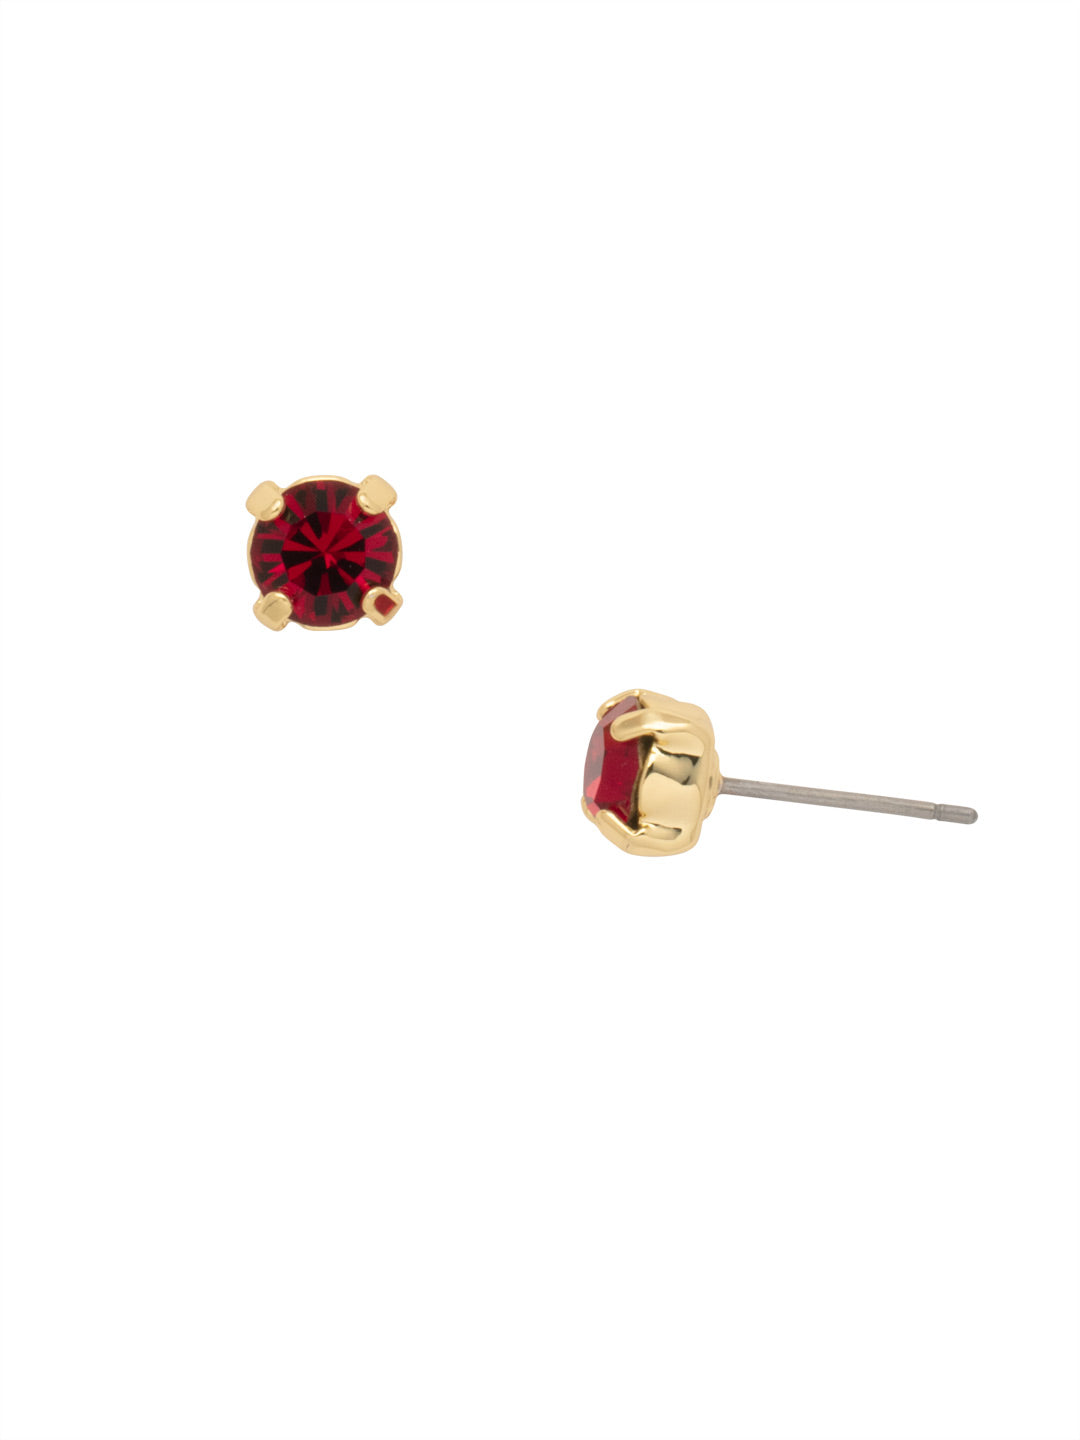 Jayda Stud Earrings - EDN32BGSI - <p>The Jayda Stud Earrings are the perfect every day wardrobe staple. A round crystal nestles perfectly in a metal plated post with four prongs. </p><p>Need help picking a stud? <a href="https://www.sorrelli.com/blogs/sisterhood/round-stud-earrings-101-a-rundown-of-sizes-styles-and-sparkle">Check out our size guide!</a> From Sorrelli's Siam collection in our Bright Gold-tone finish.</p>